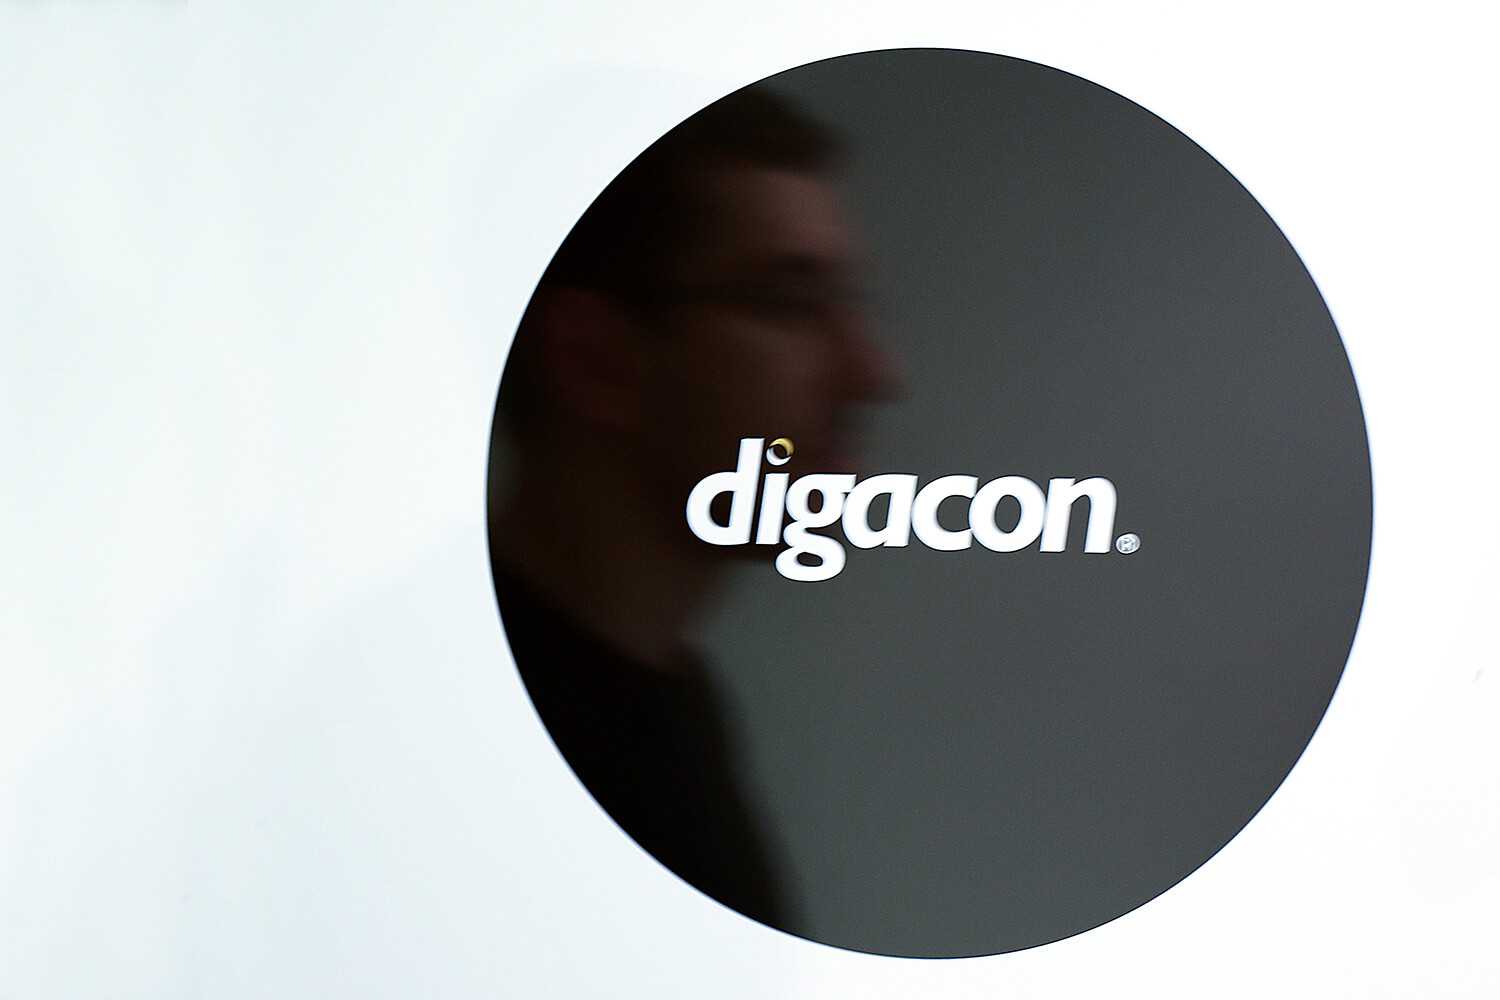 Digacon logo on wall with man in reflection